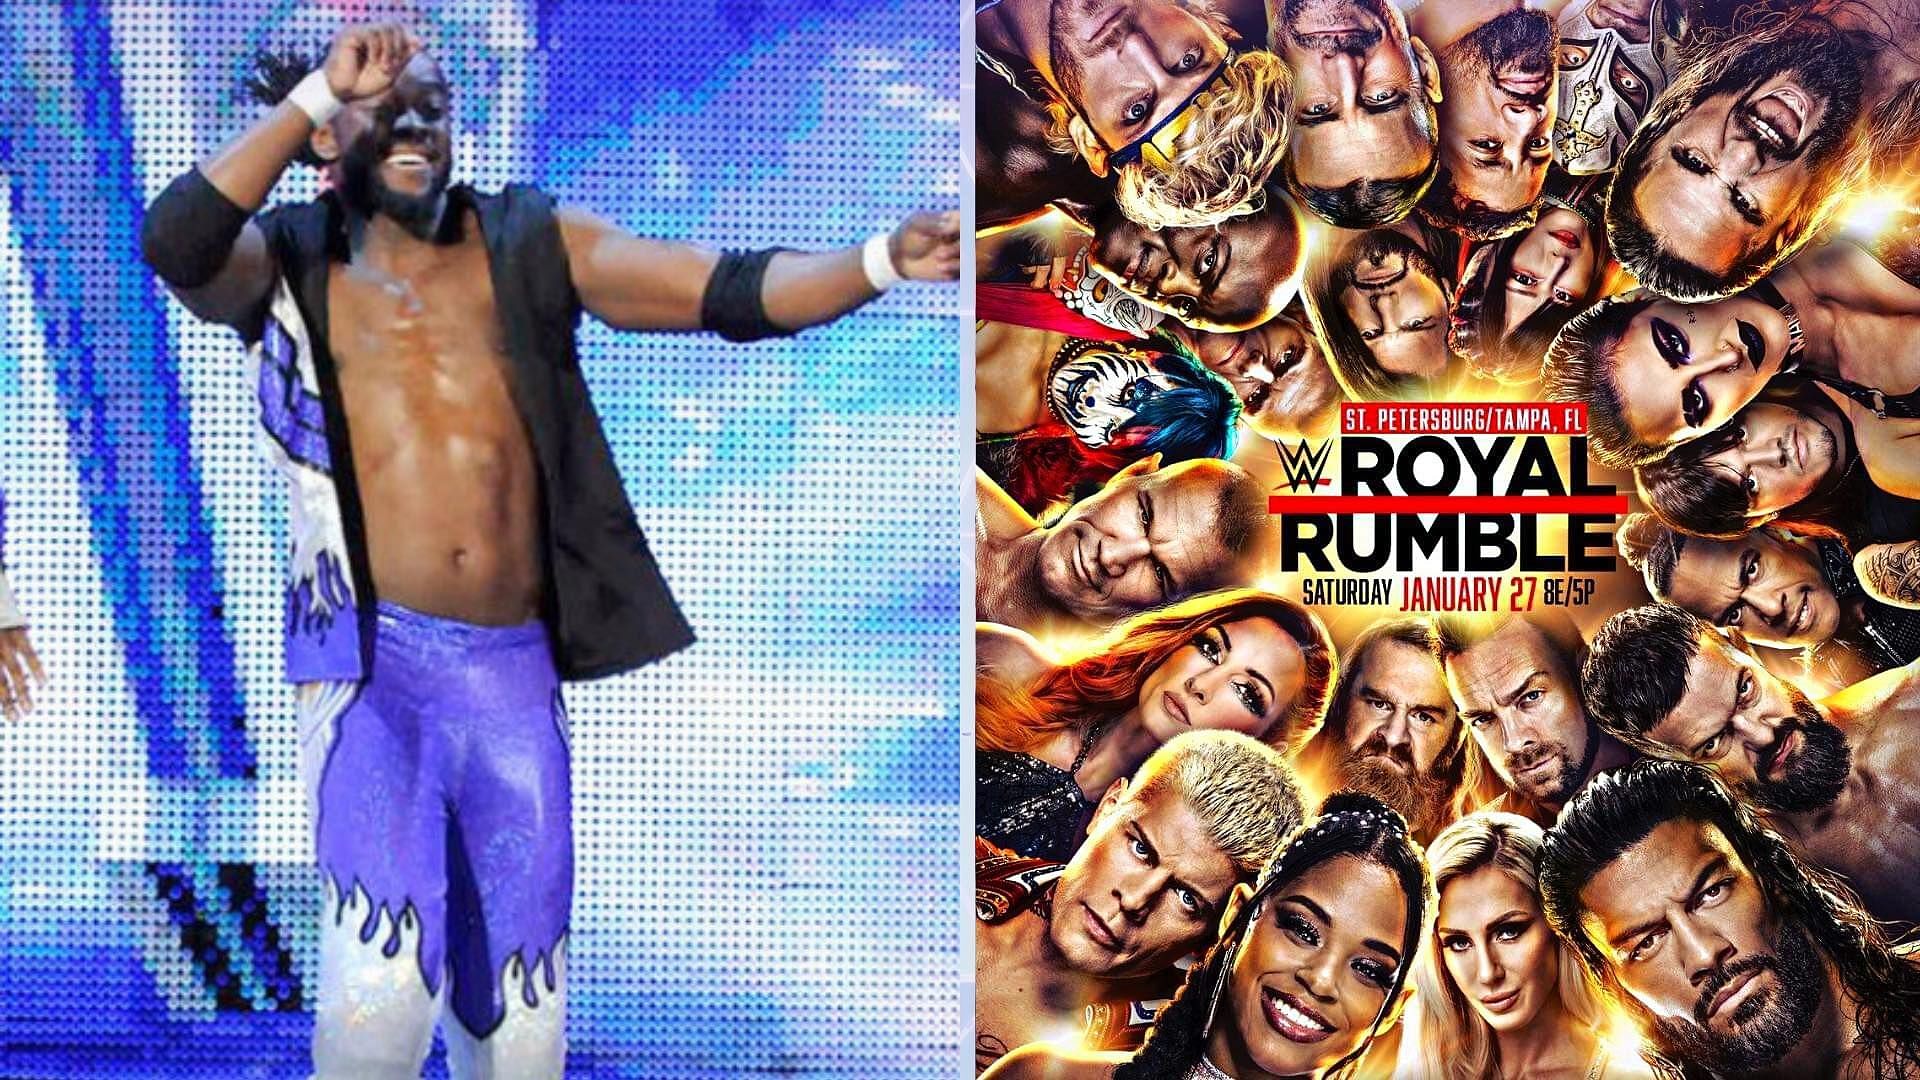 Kofi Kingston is well known for his WWE Royal Rumble Match performances